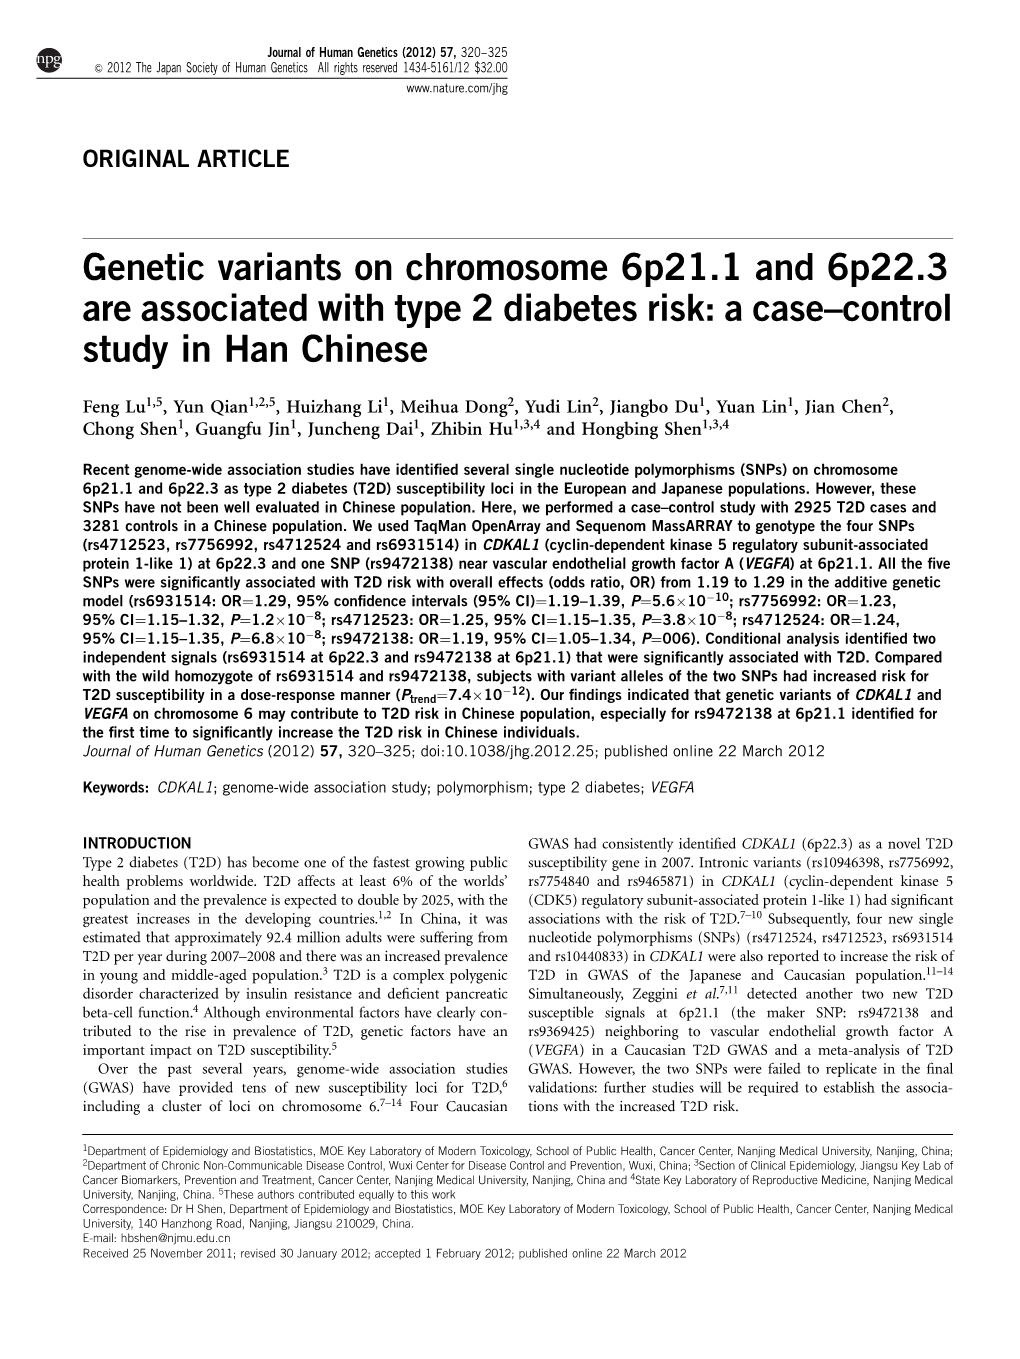 Genetic Variants on Chromosome 6P21.1 and 6P22.3 Are Associated with Type 2 Diabetes Risk: a Case–Control Study in Han Chinese